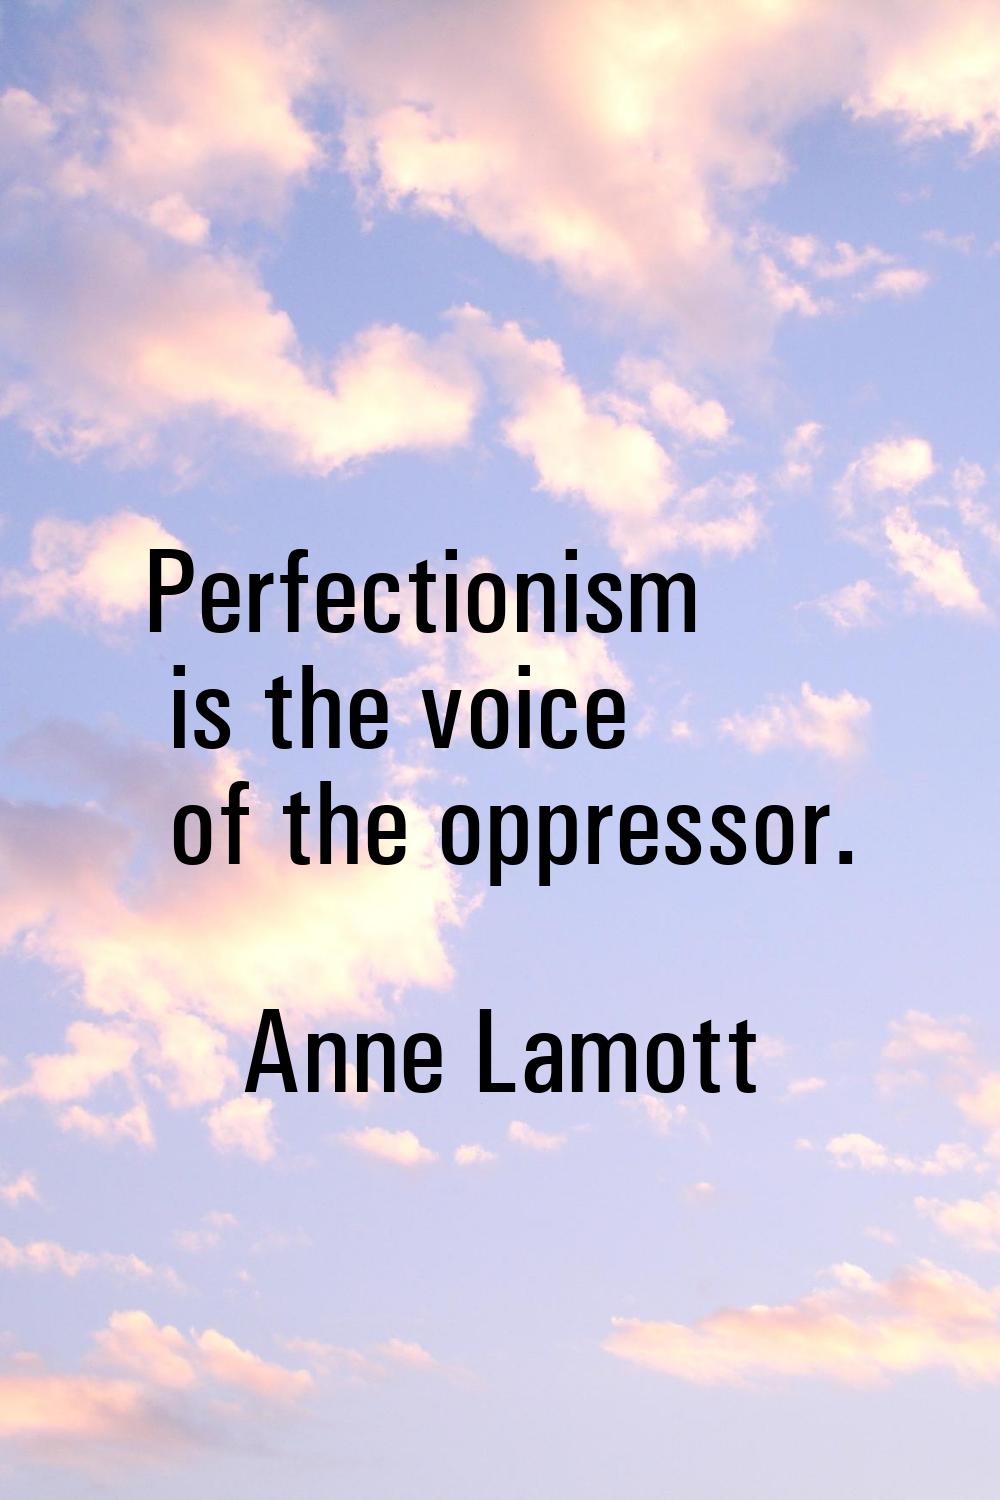 Perfectionism is the voice of the oppressor.